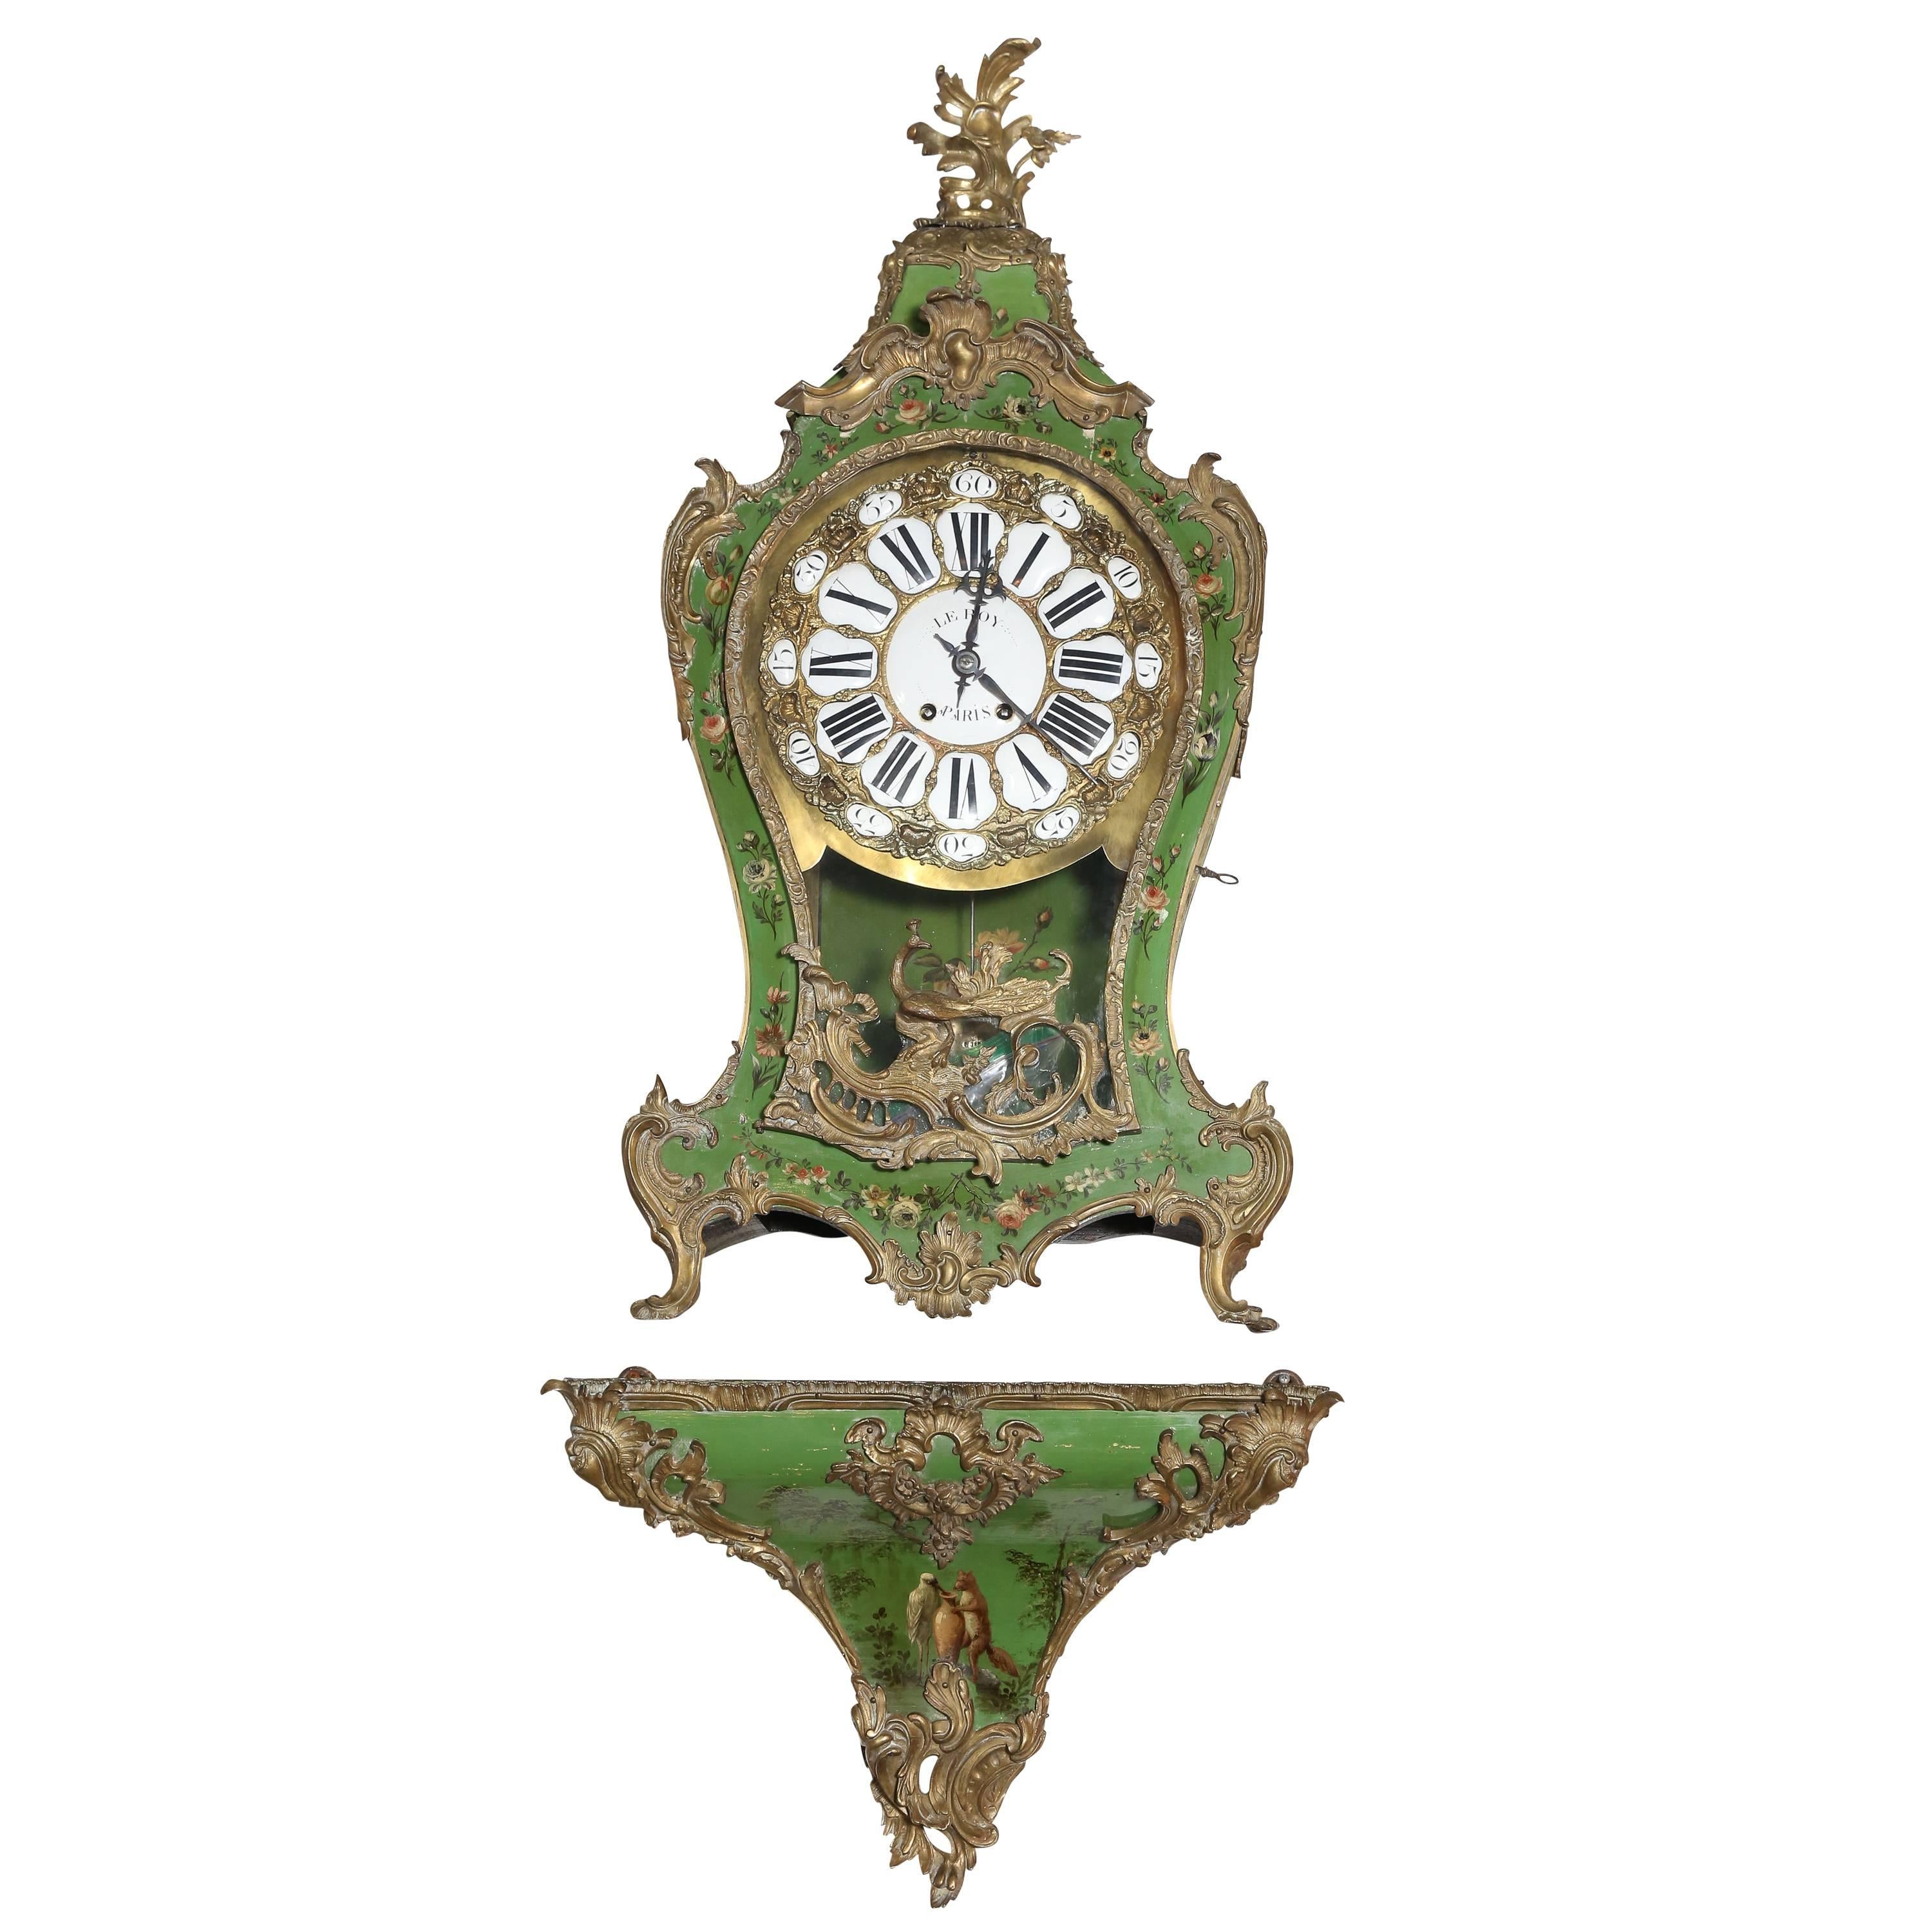  Large Pierre Le Roy Cartel Clock in Hand-Painted Case & Bracket For Sale